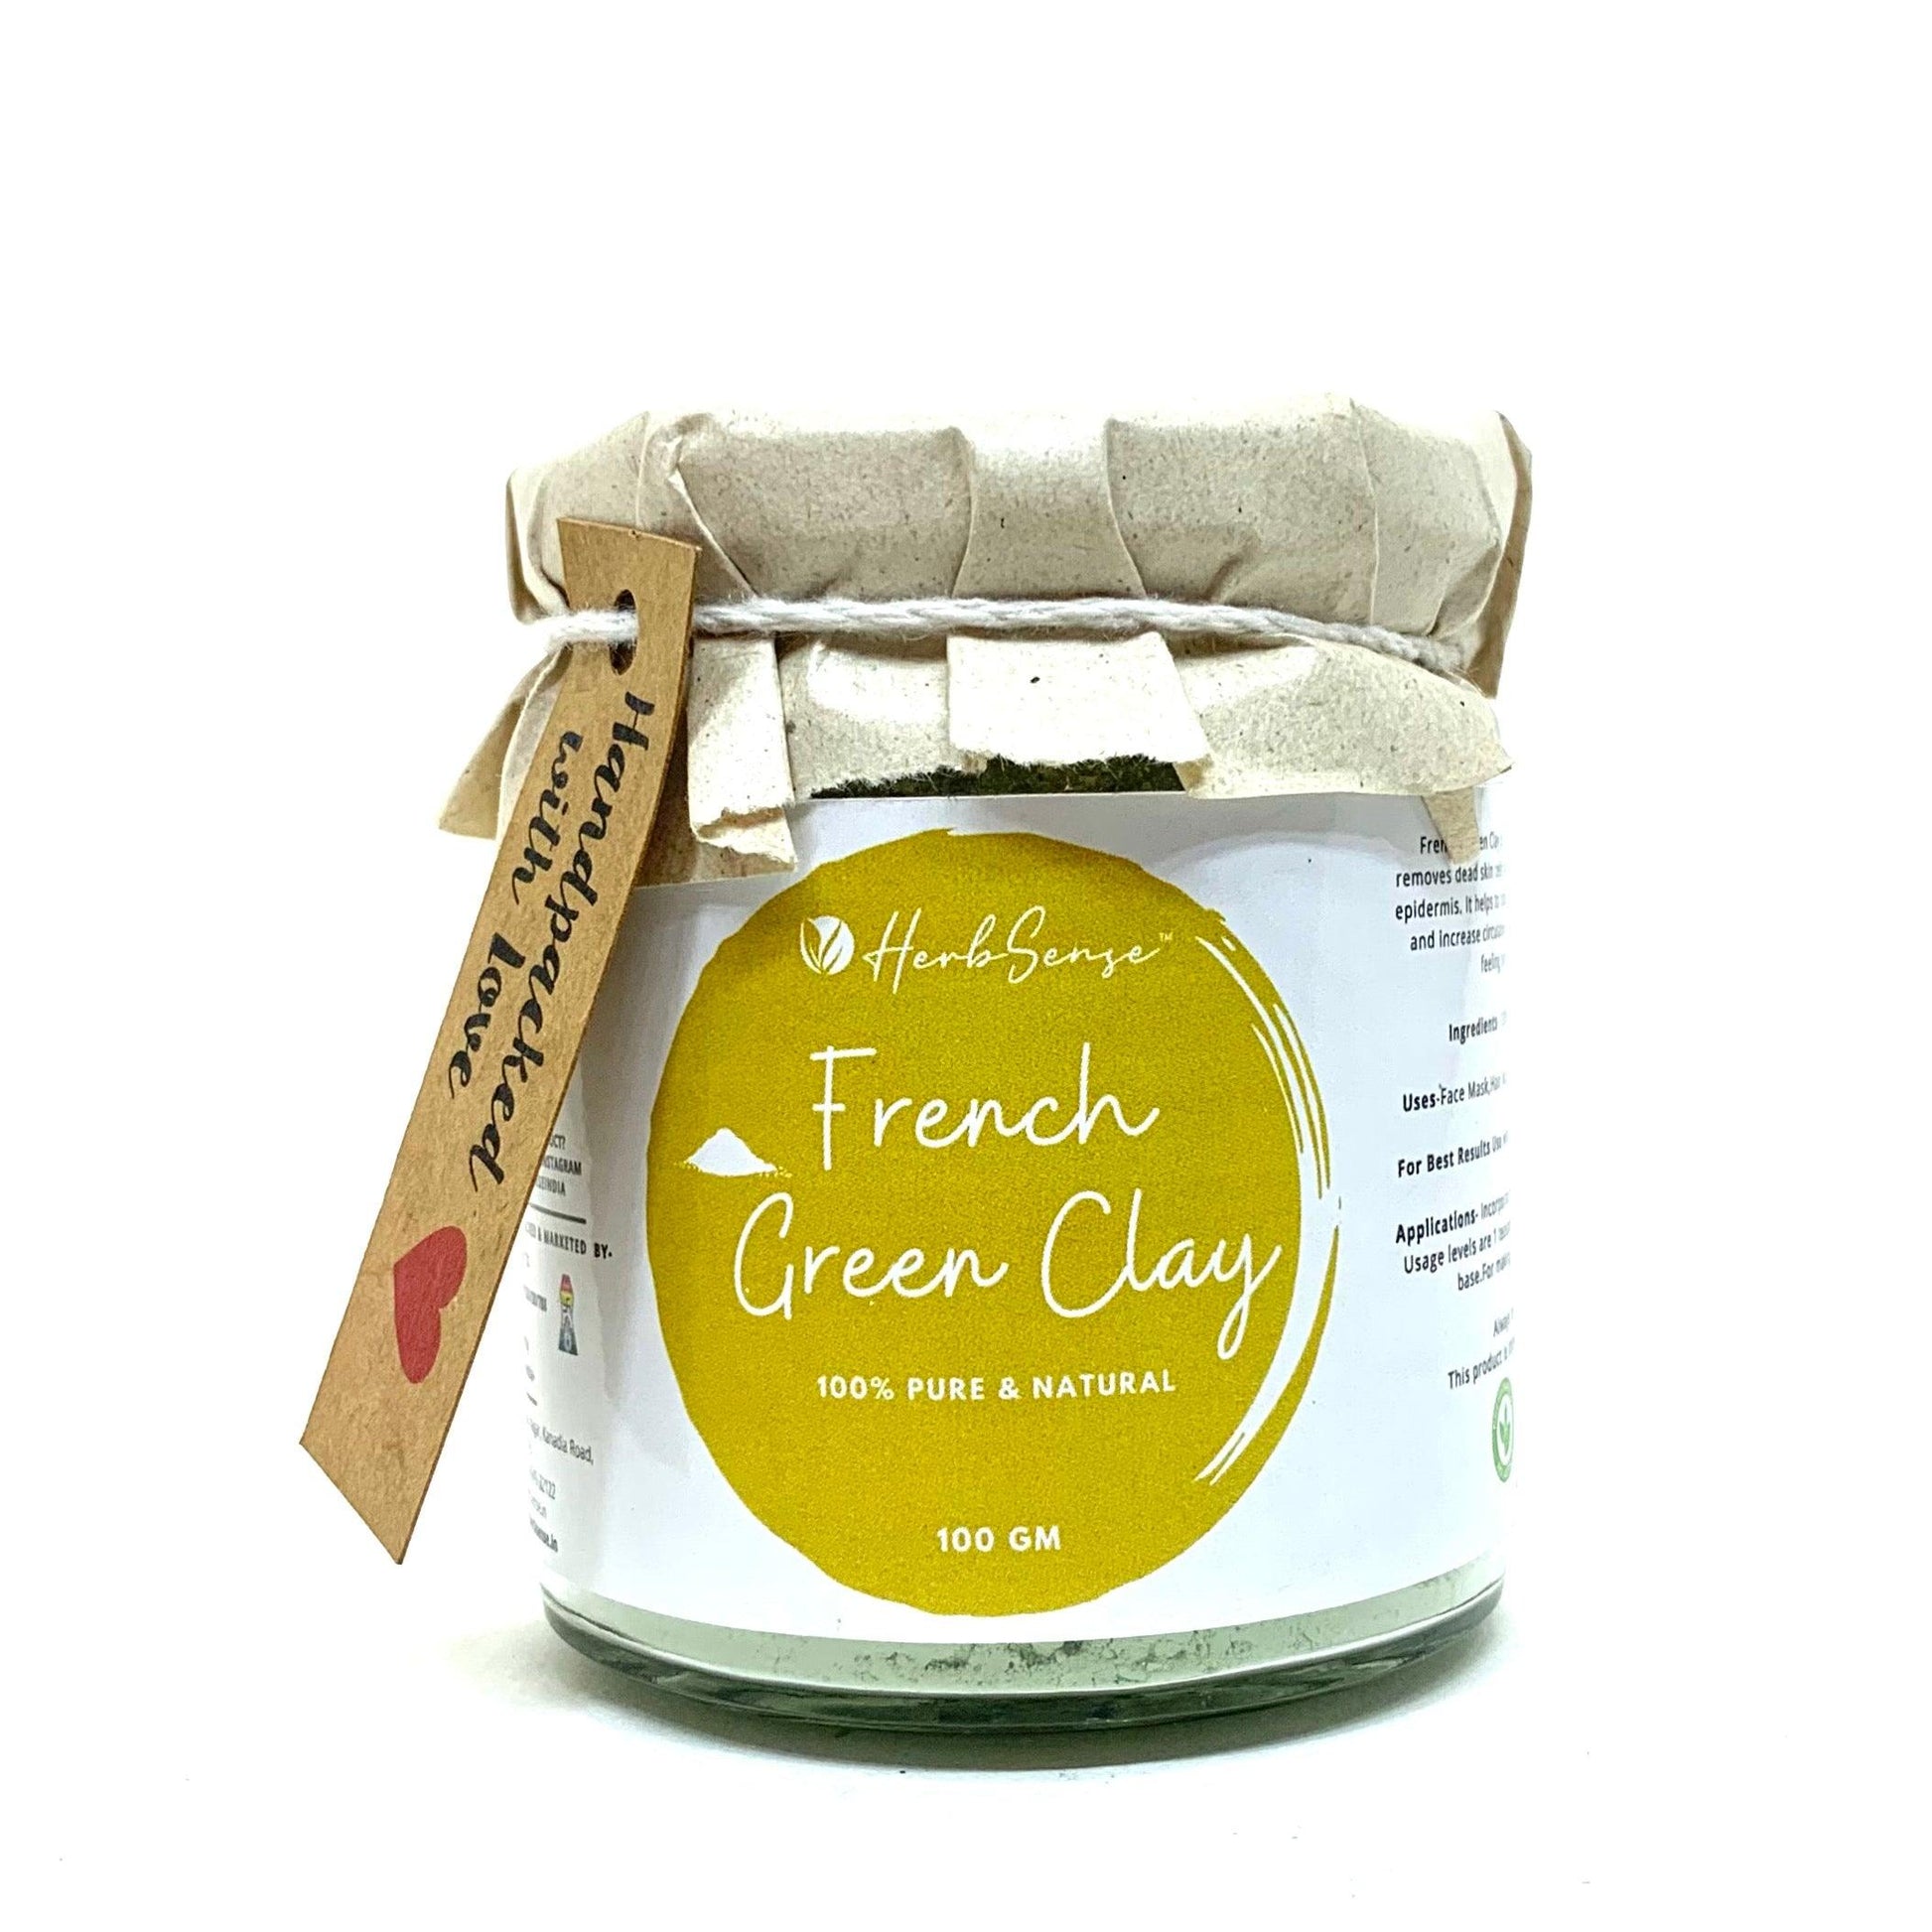 French Green Clay-100gm- For Glowing & Healthy Skin, Deep Cleansing ,Nourishing & Detoxifying Clay Mask, - Herbsense